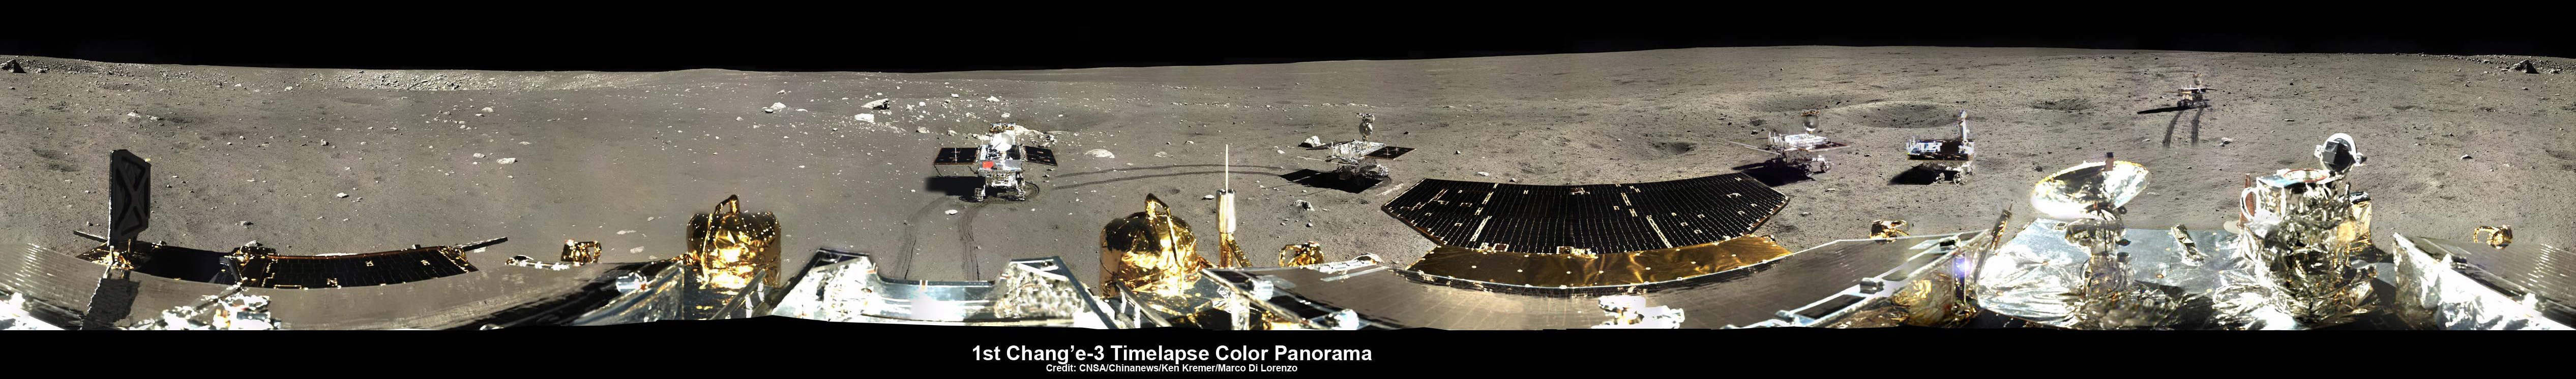 360-degree time-lapse color panorama from China’s Chang’e-3 lander. This new 360-degree time-lapse color panorama from China’s Chang’e-3 lander shows the Yutu rover at five different positions, including passing by crater and heading south and away from the Chang’e-3 lunar landing site forever during its trek over the Moon’s surface at its landing site from Dec. 15-22, 2013 during the 1st Lunar Day. Credit: CNSA/Chinanews/Ken Kremer/Marco Di Lorenzo – kenkremer.com.  See our Yutu timelapse pano at NASA APOD Feb. 3, 2014: http://apod.nasa.gov/apod/ap140203.htm